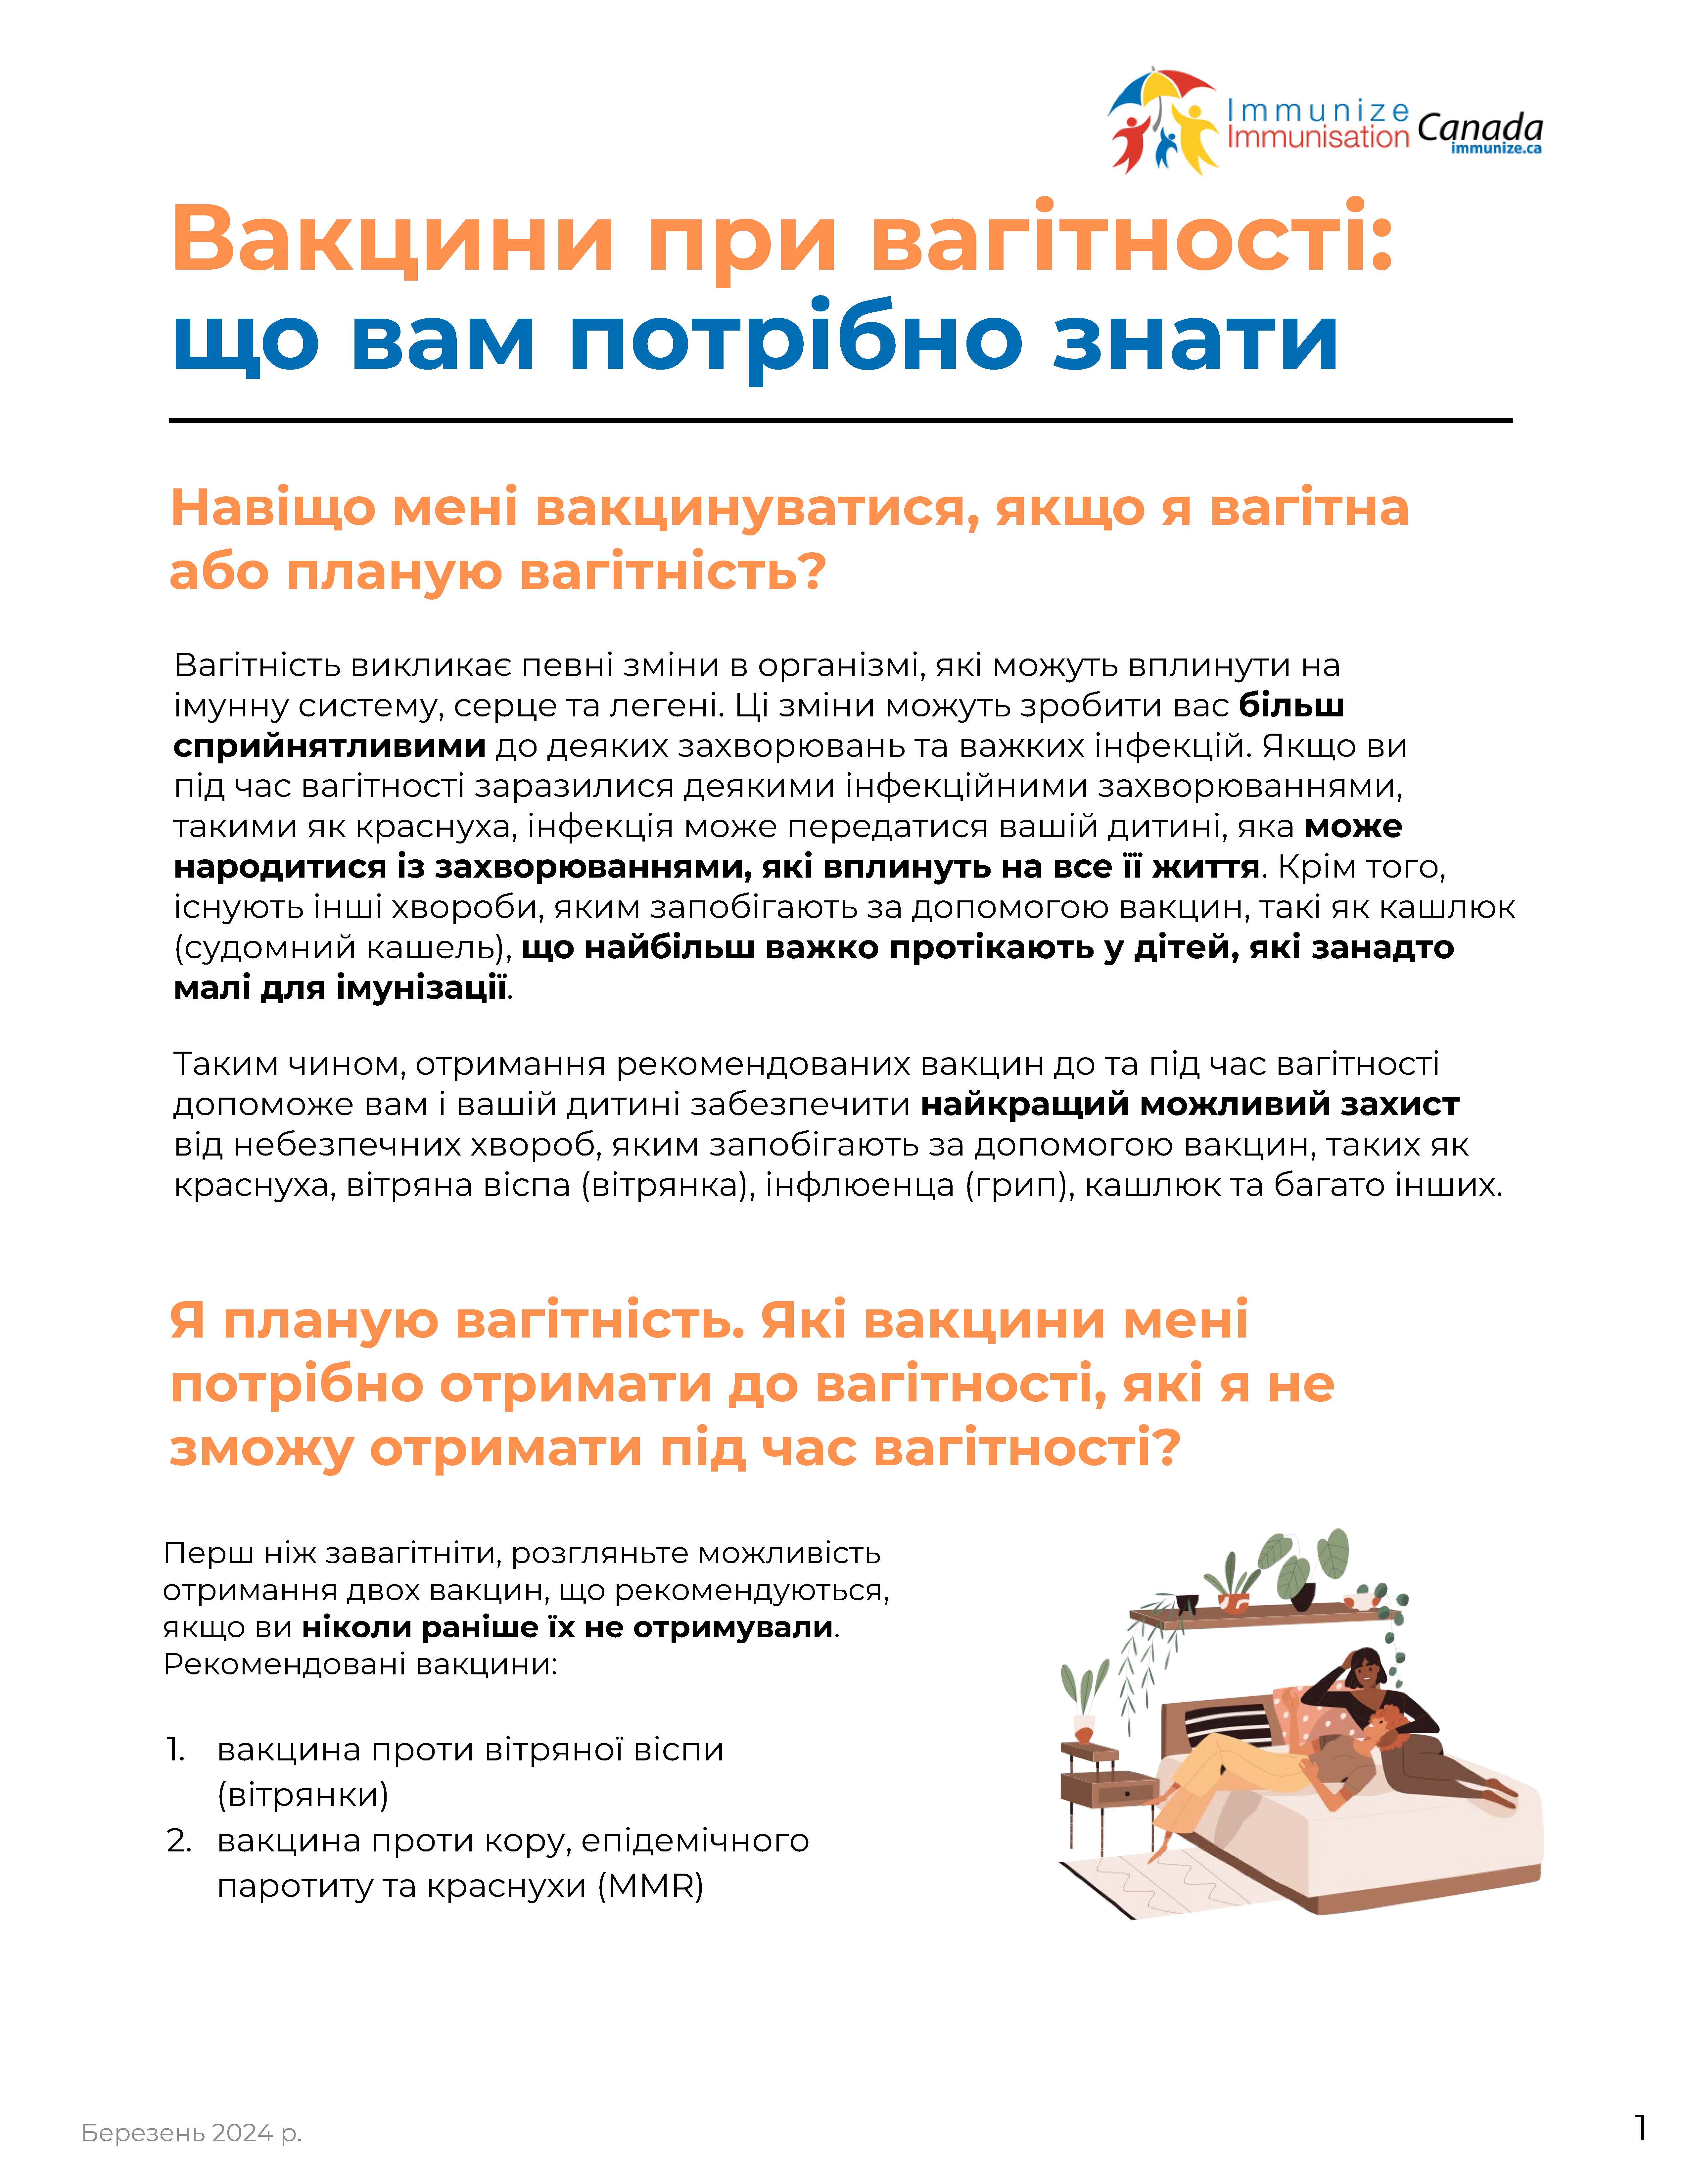 Vaccines in Pregnancy: What you need to know (factsheet in Ukrainian)